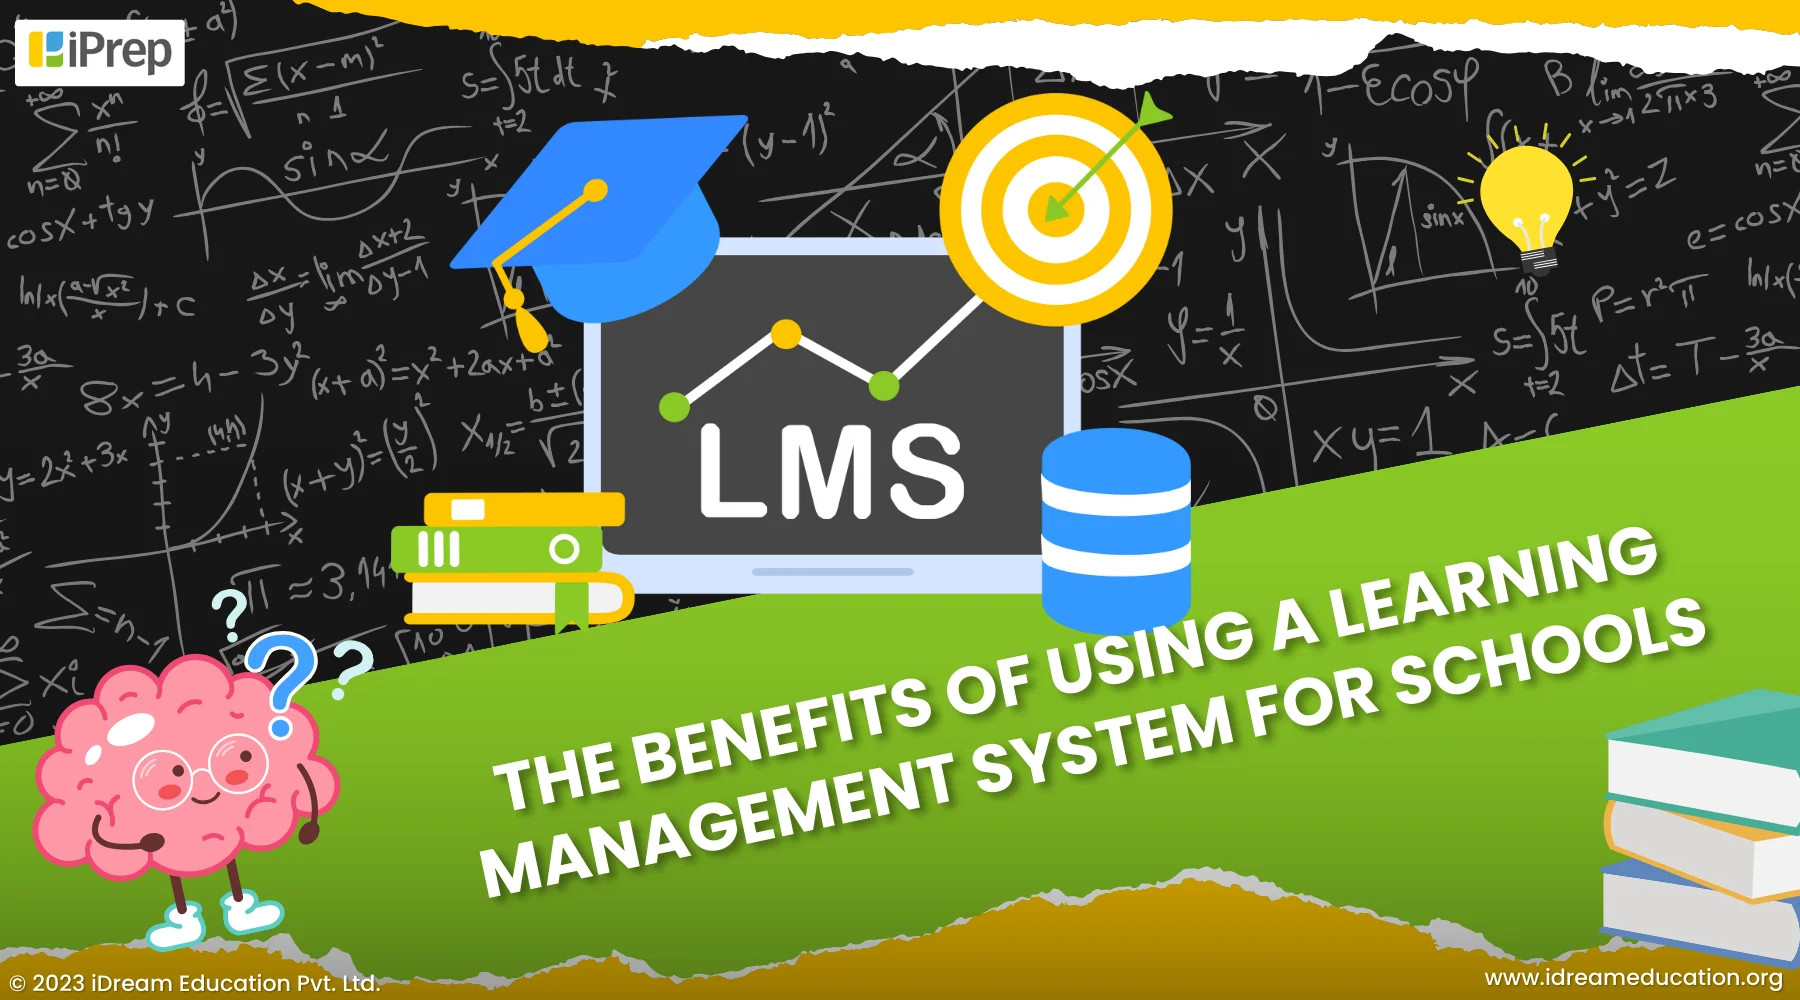 A visual representation of the benefits of using a learning management system or LMS for schools such as iPrep